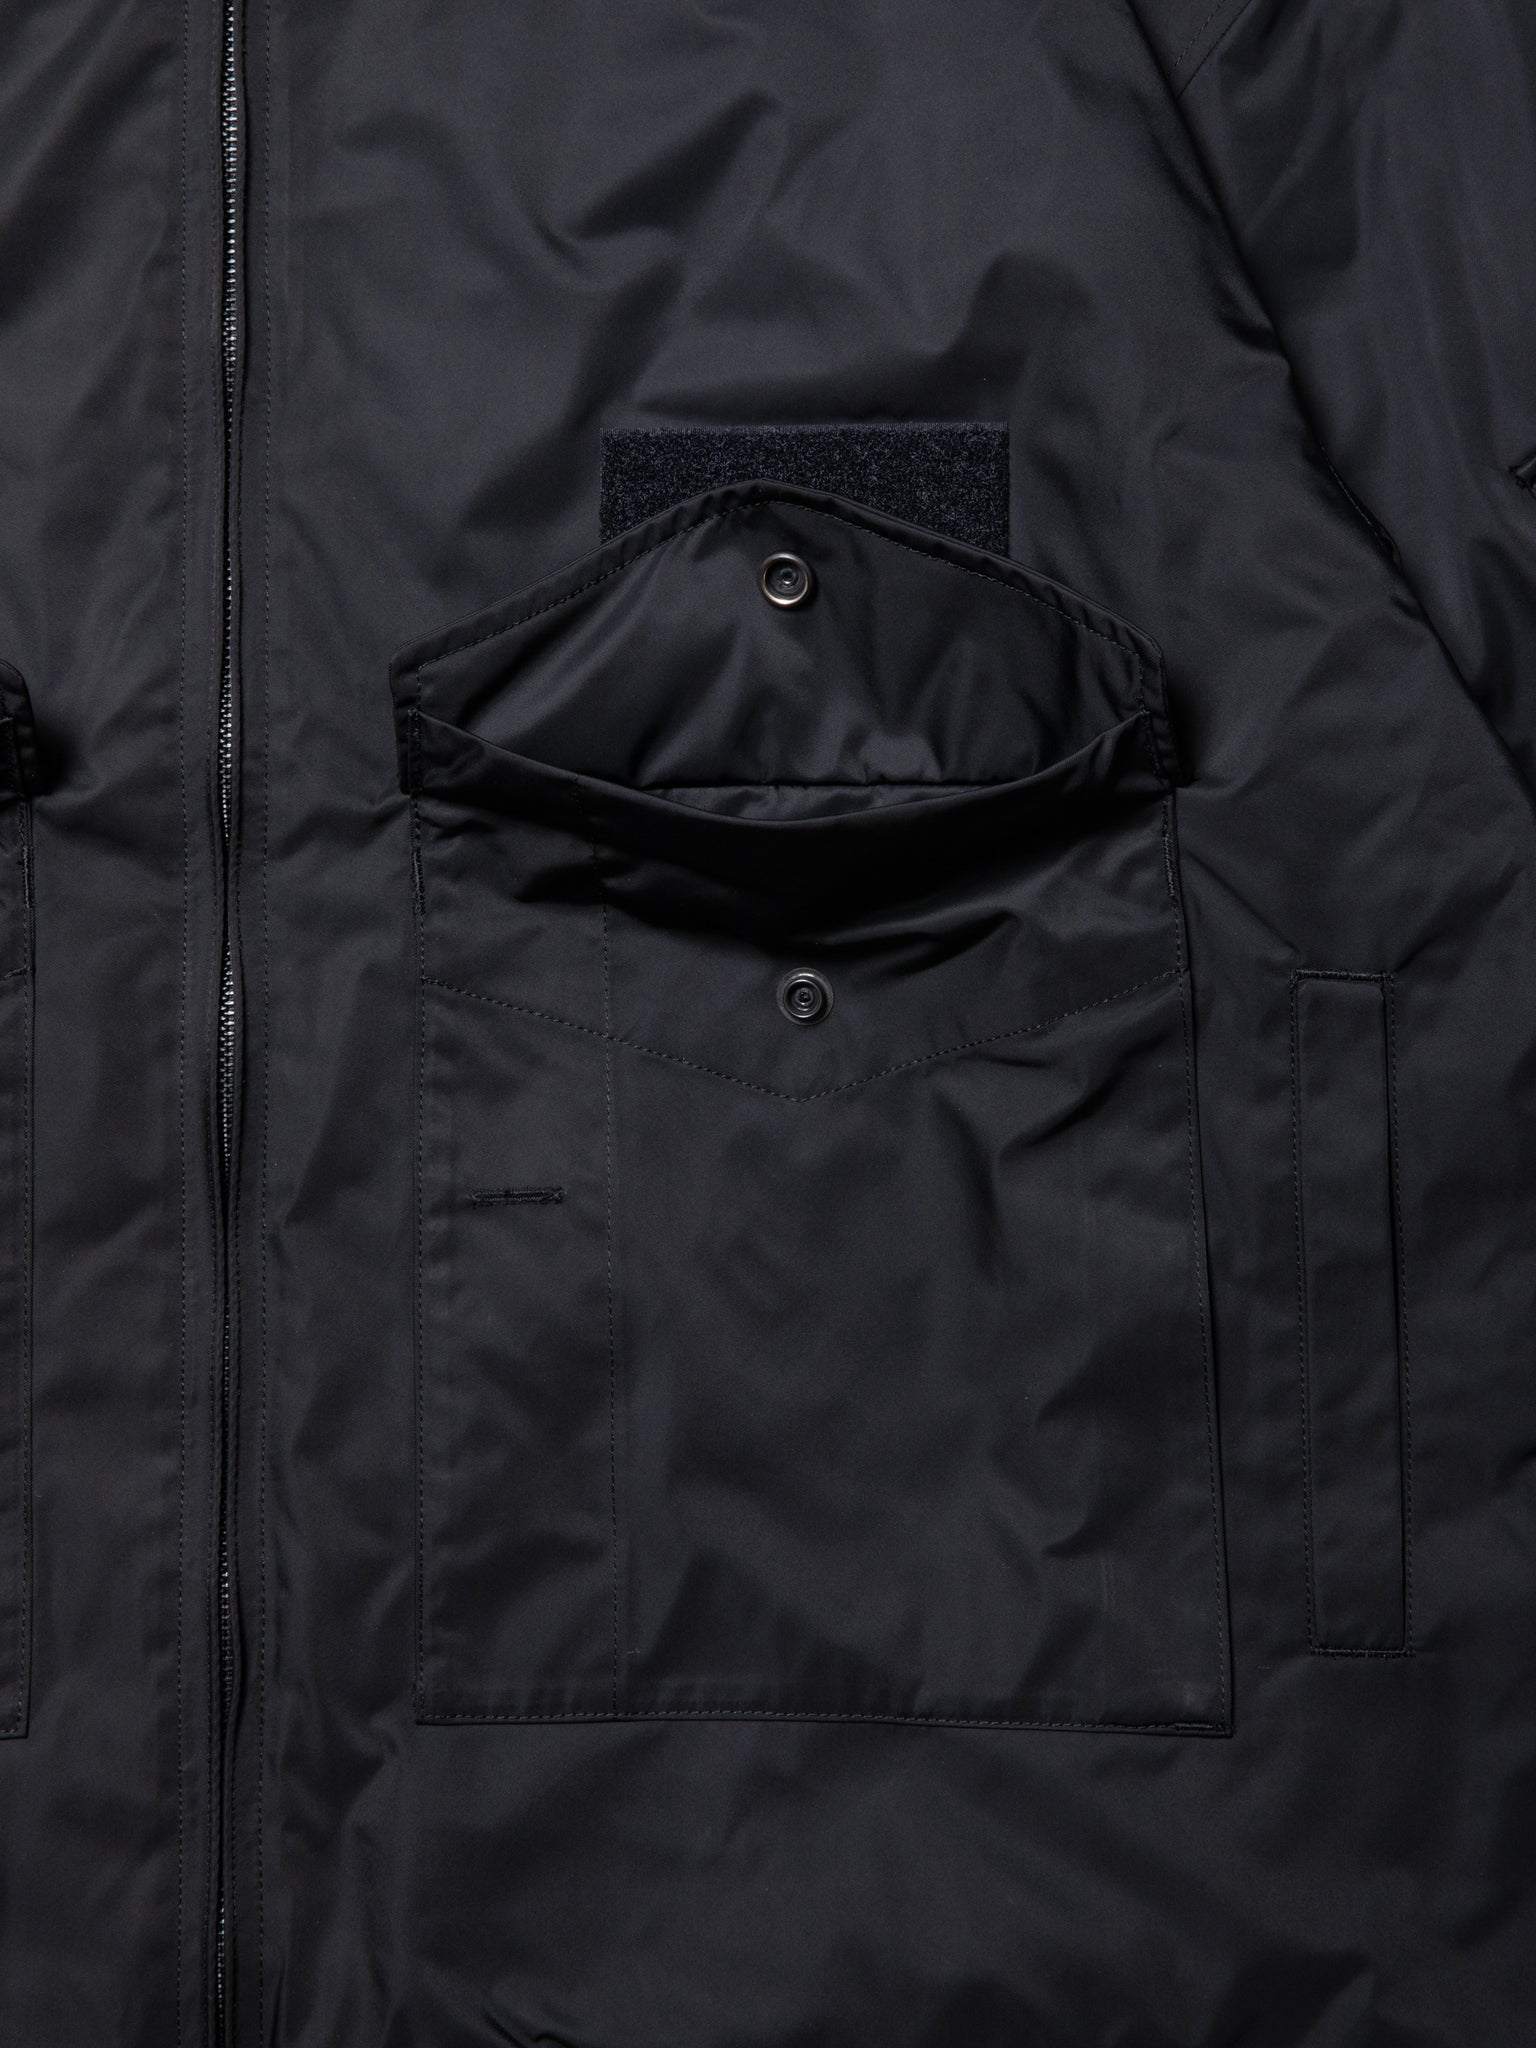 Memory Polyester Twill WEP Jacket – Roots Bonds ONLINE STORE